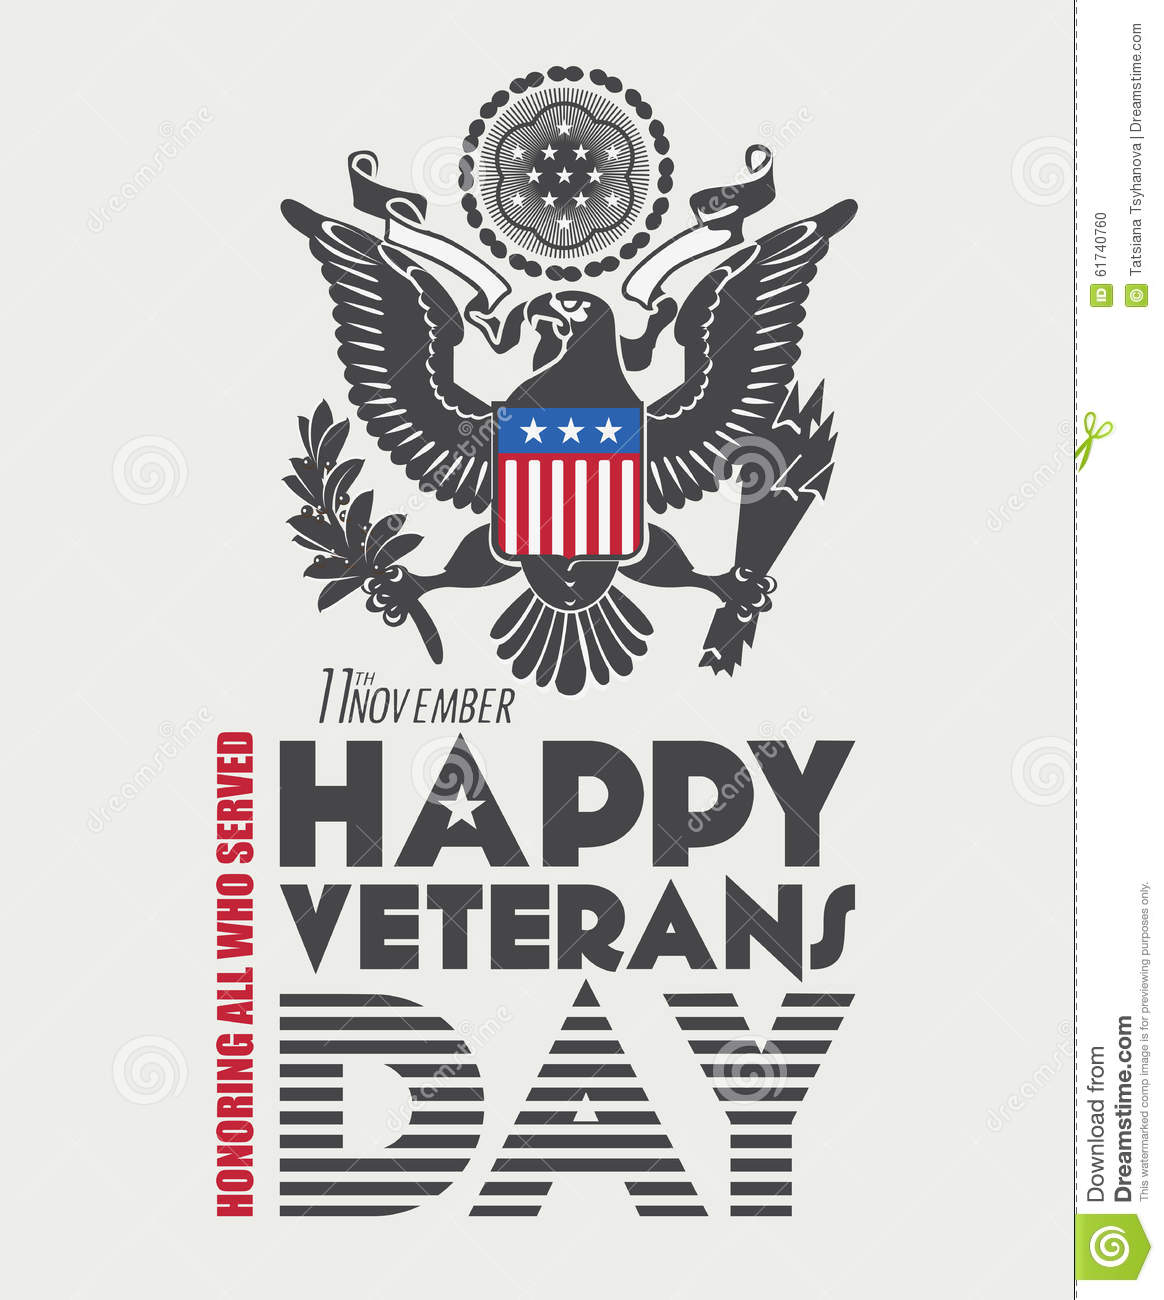 11th November Happy Veterans Day wishes card